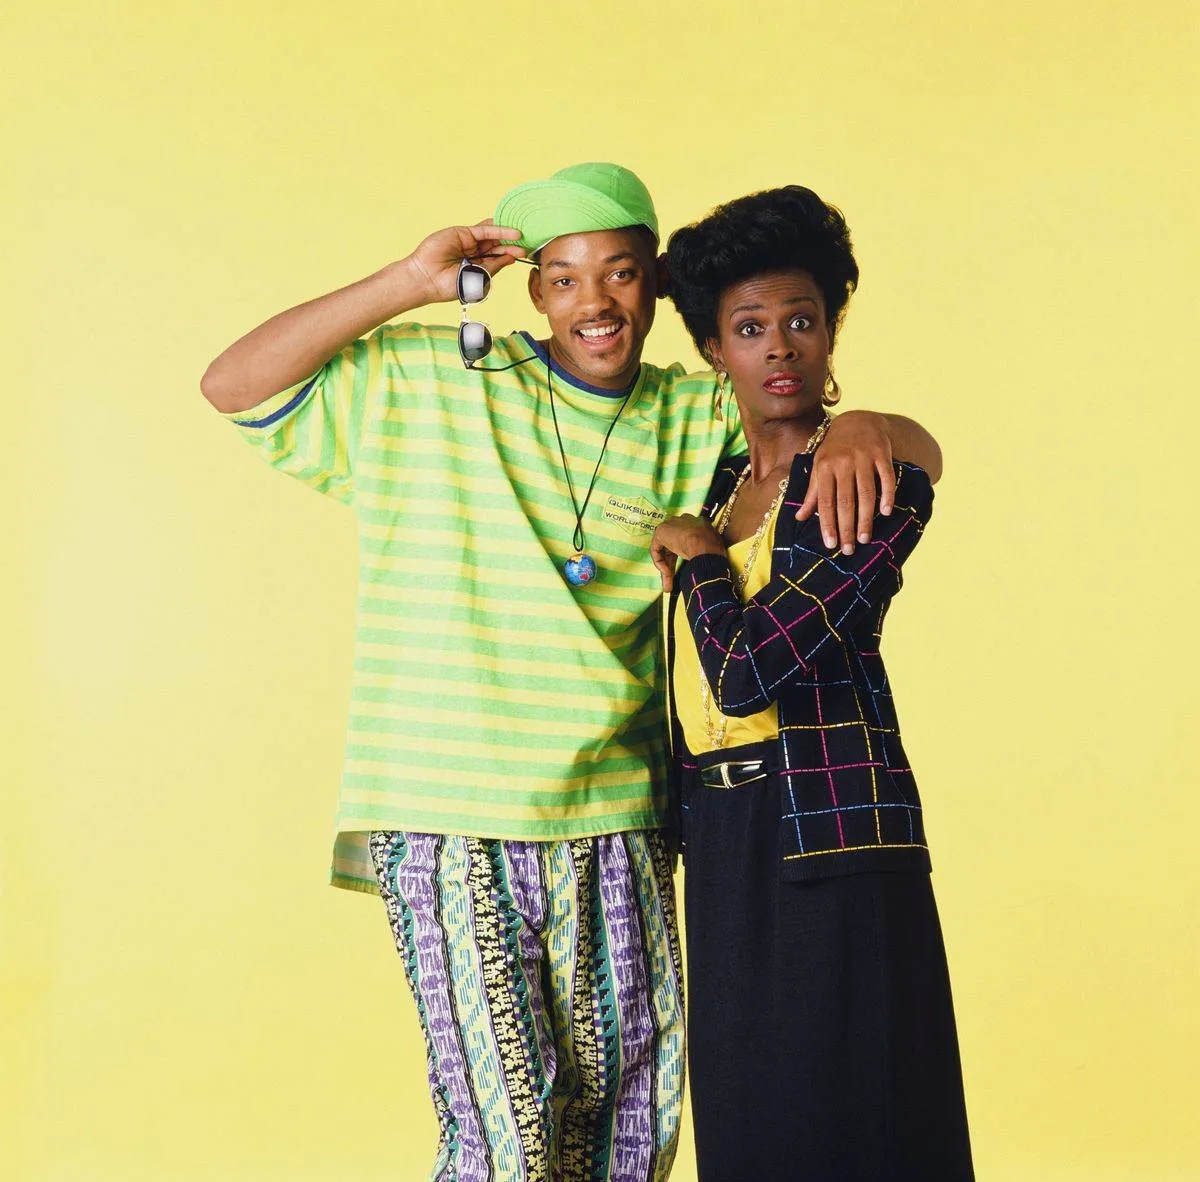 the-fresh-prince-of-bel-air_GPB5a0